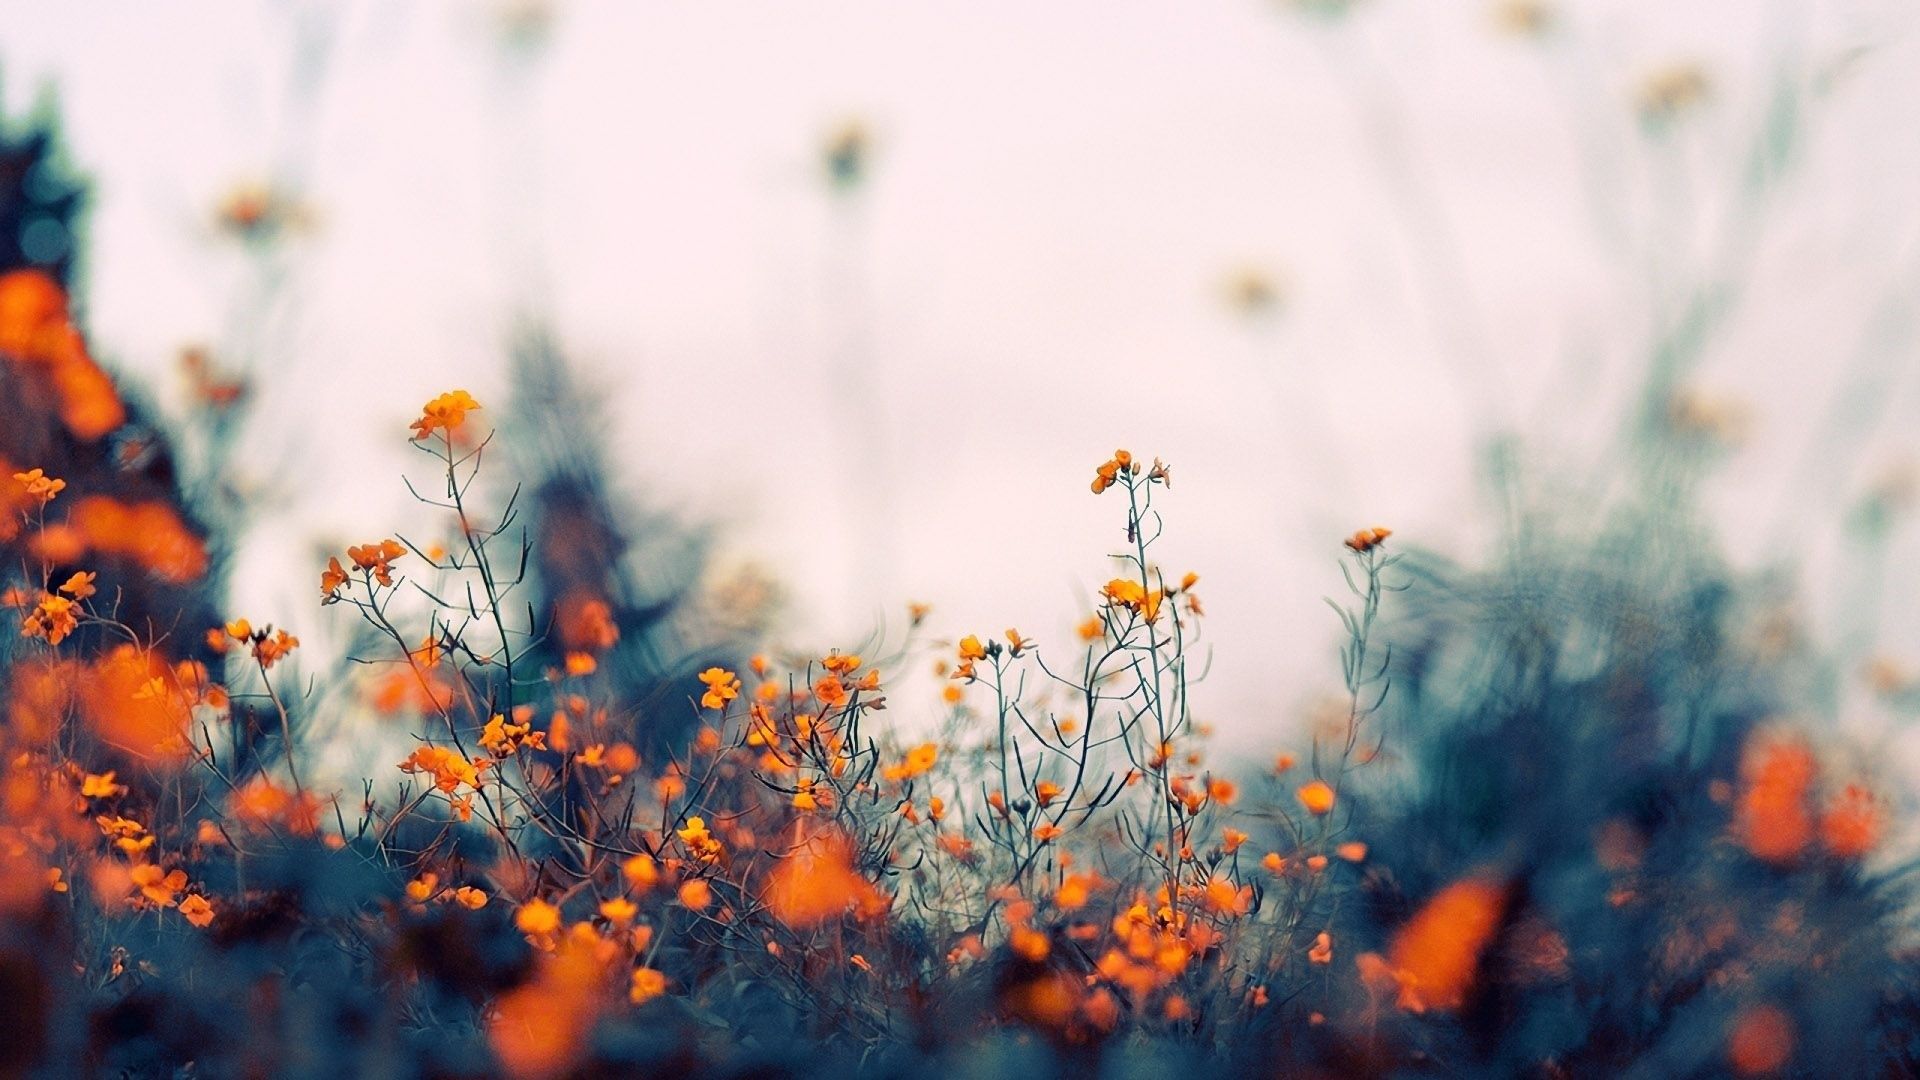 A field of orange flowers with a white sky in the background. - Flower